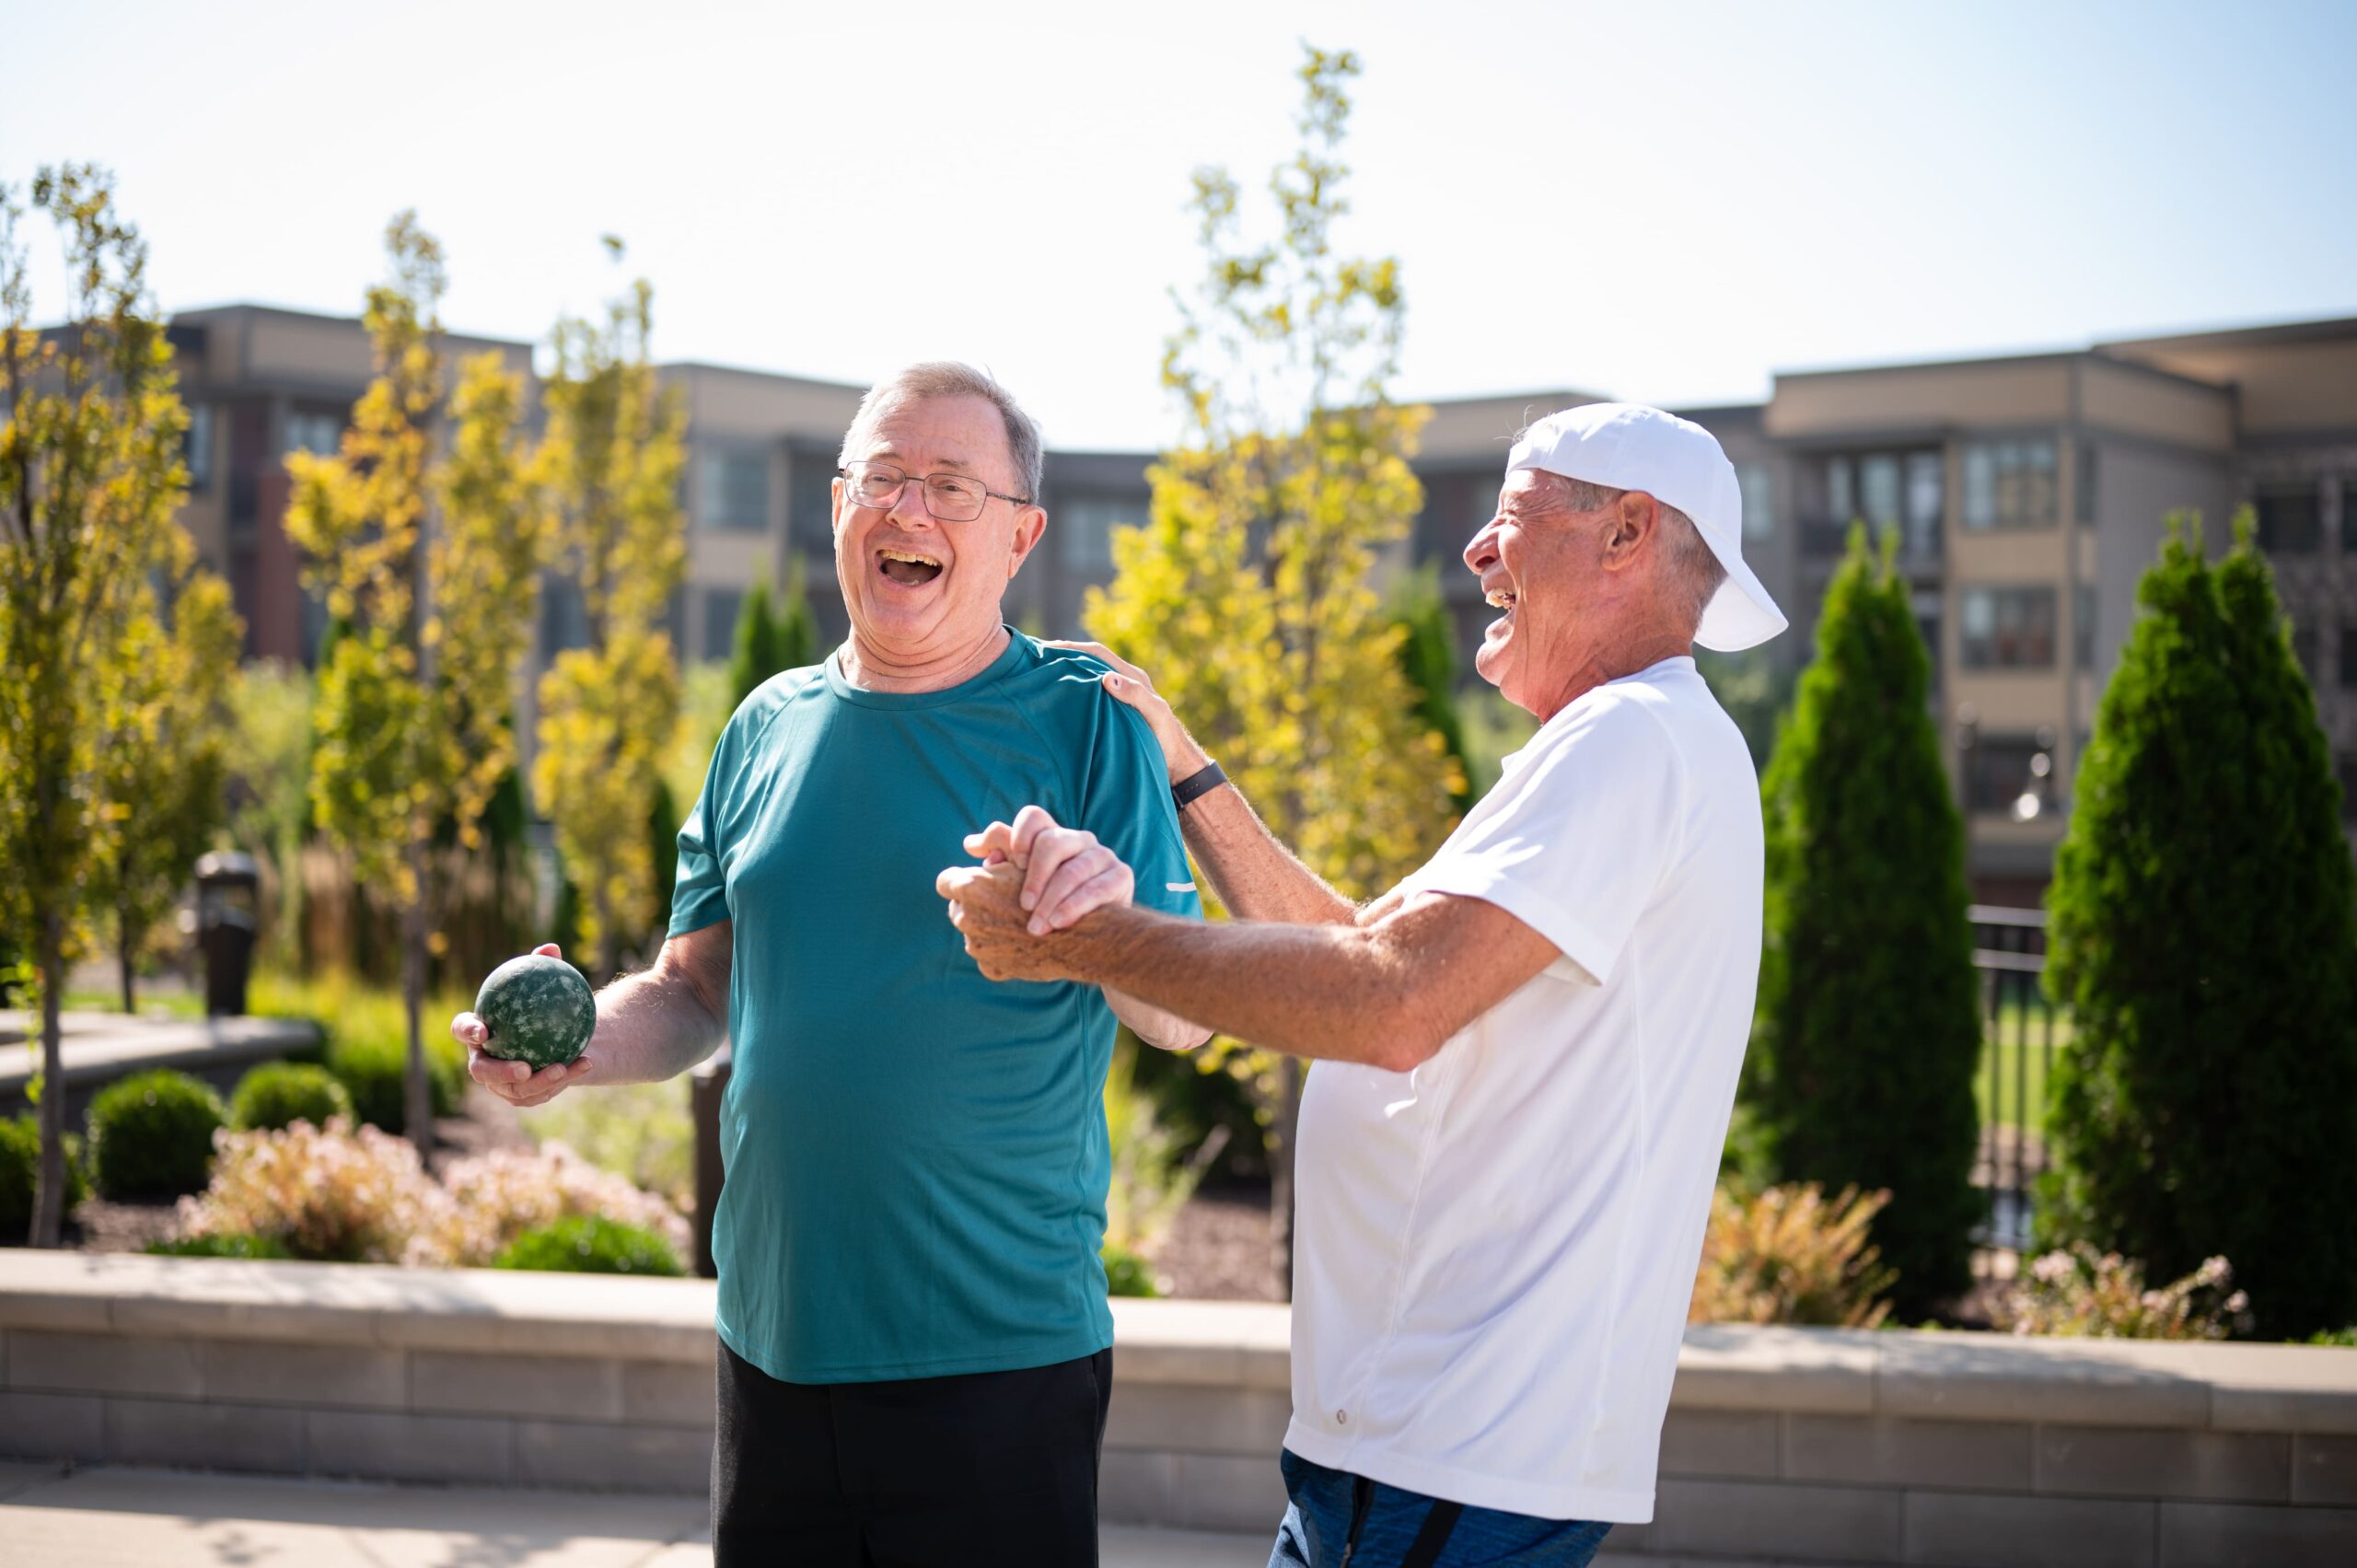 Two community members laugh together while enjoying a game of bocce ball outside.